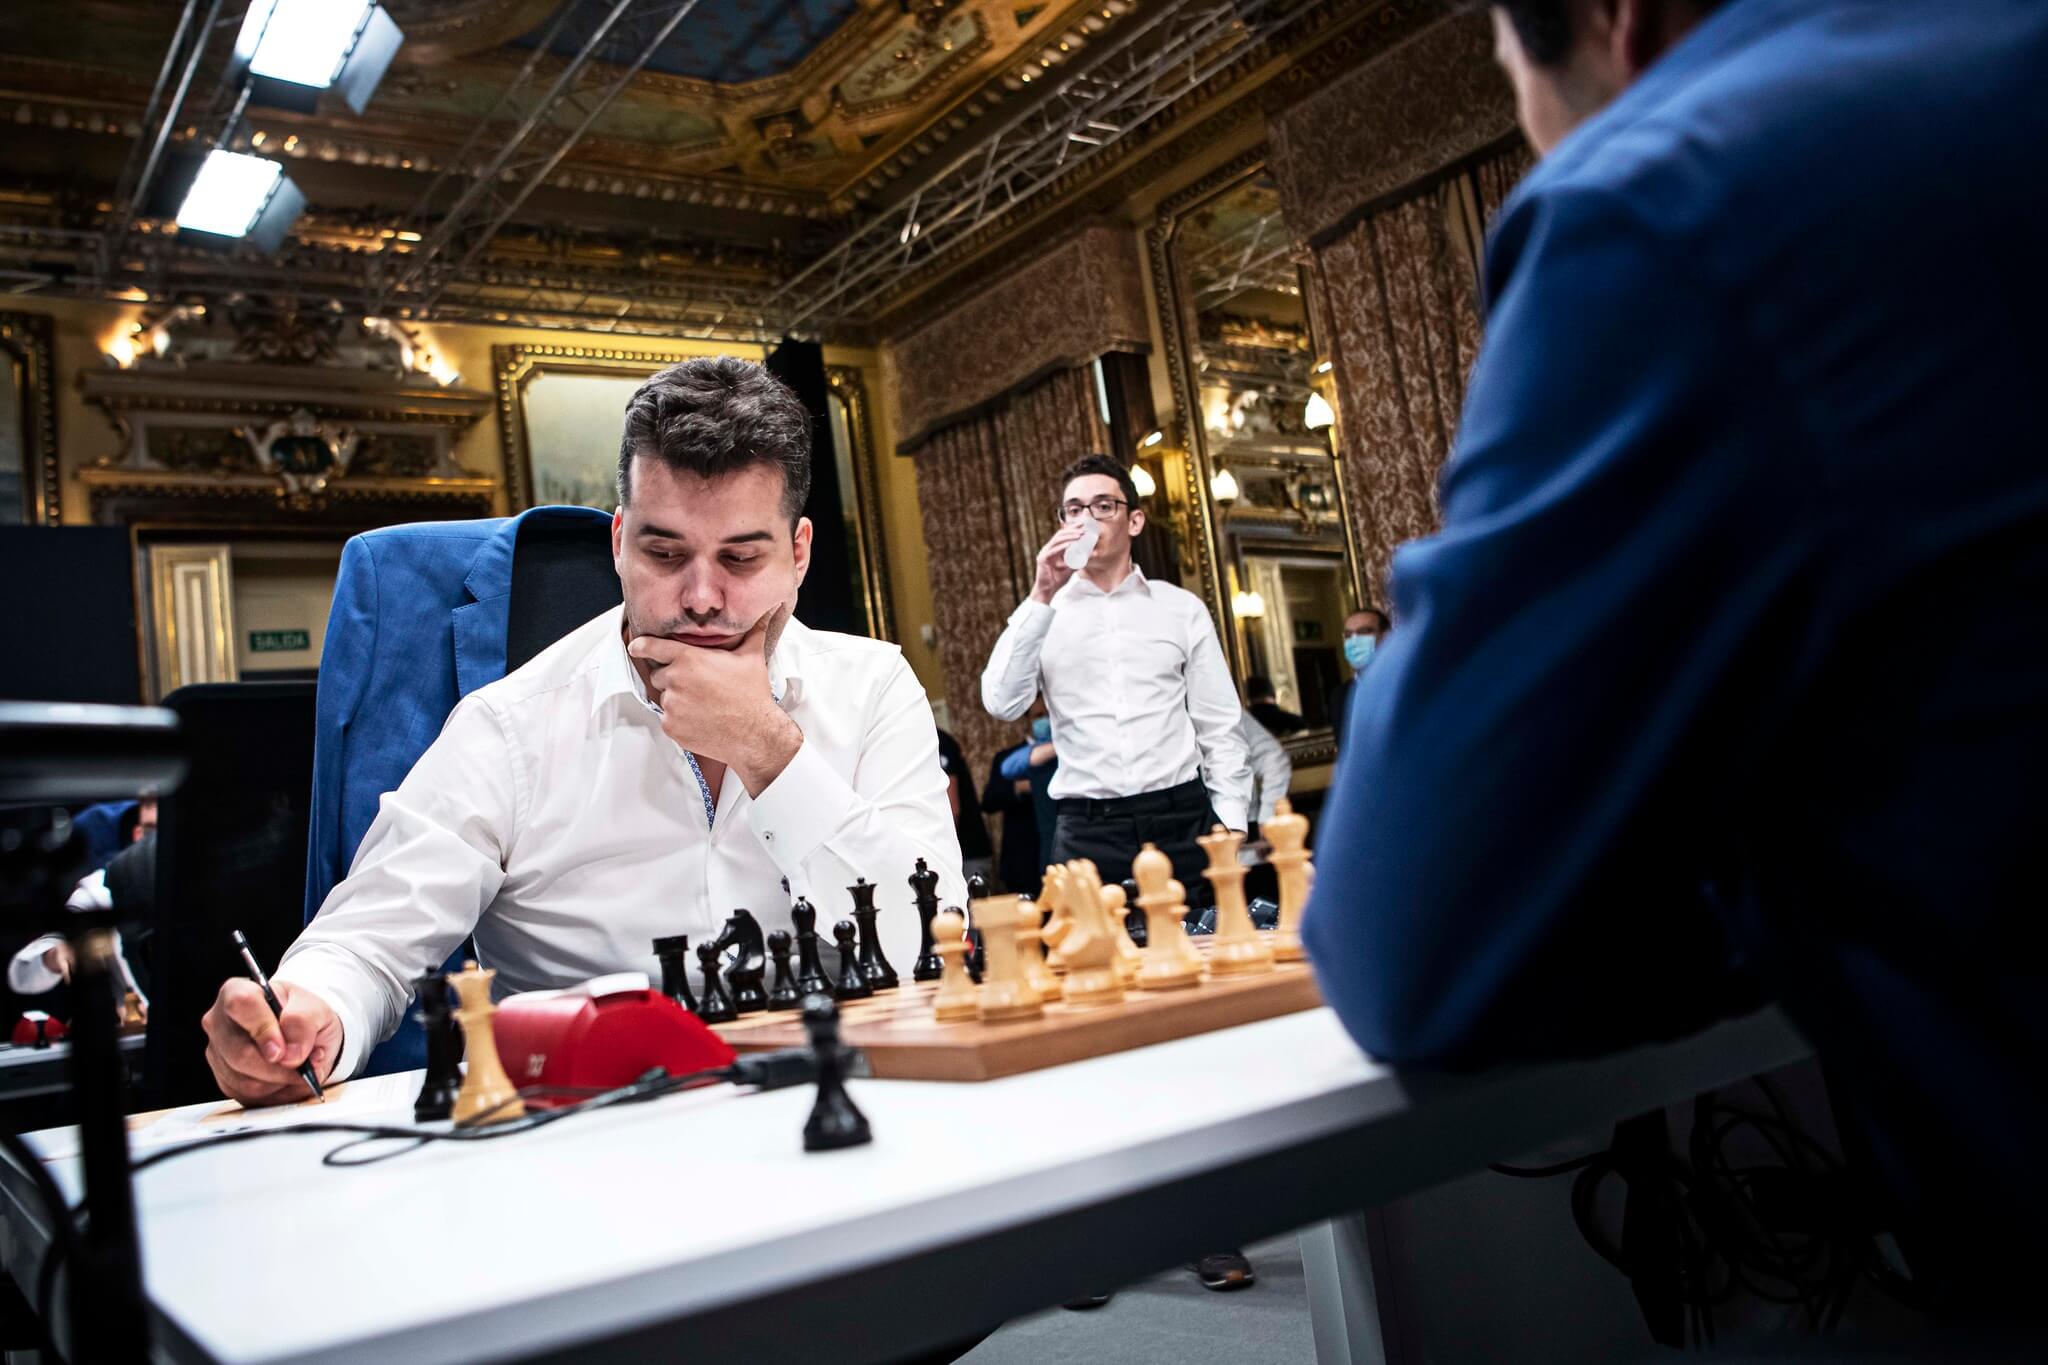 2022 FIDE Candidates  Hikaru vs. Ding: One Game To Become World